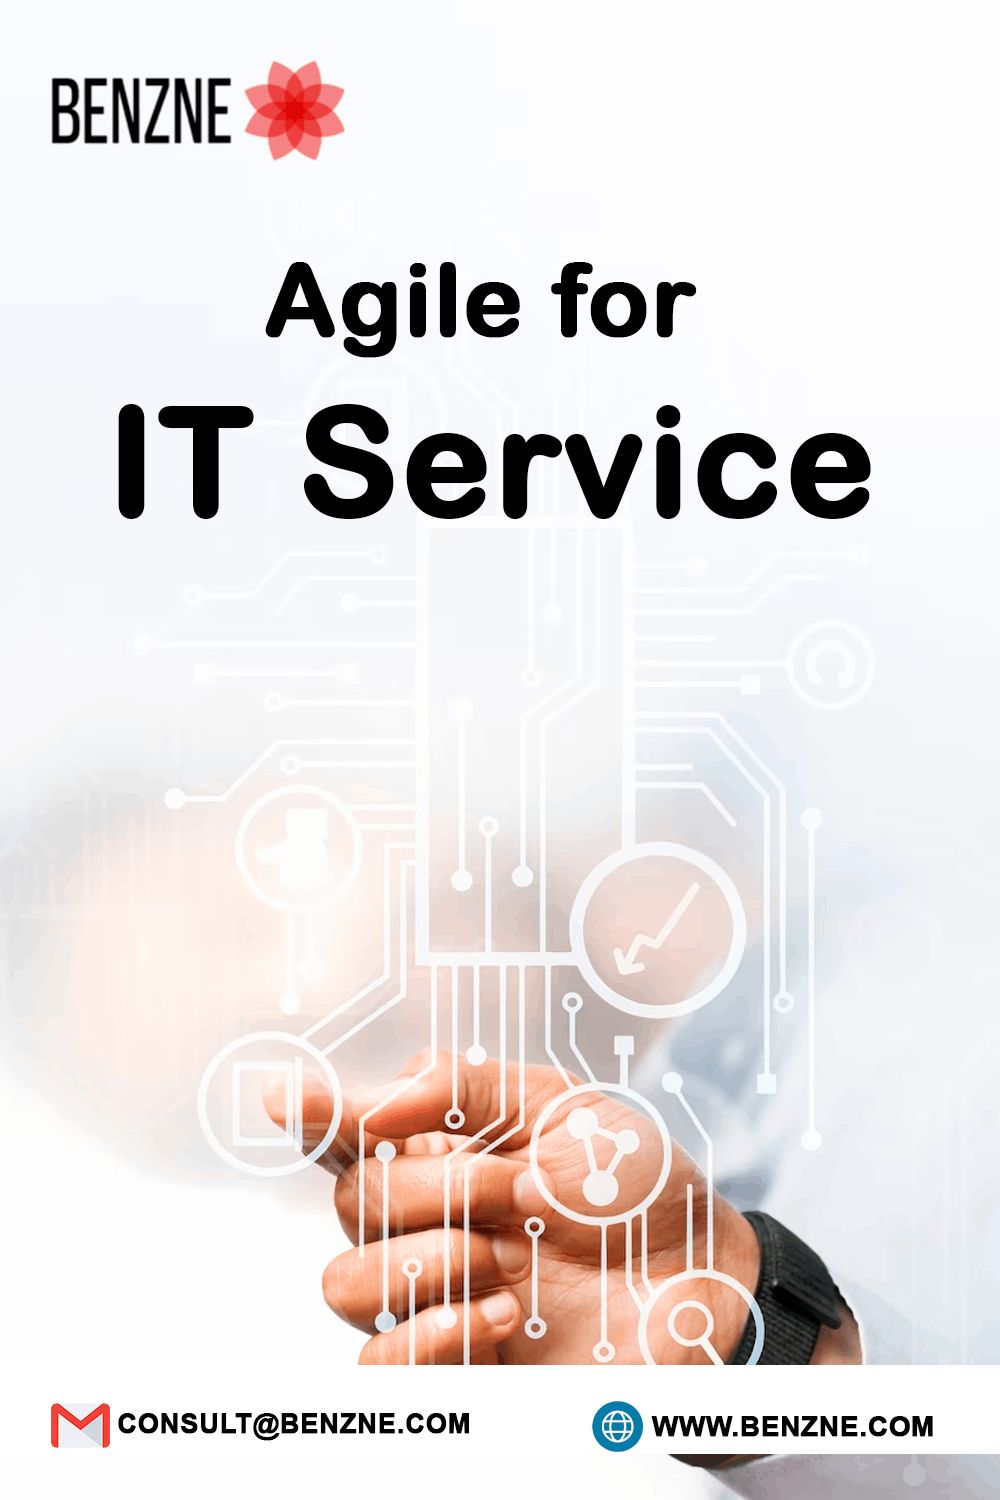 Get A Well-Planned Strategy With Benzne And Experience The Best Agile For IT Services